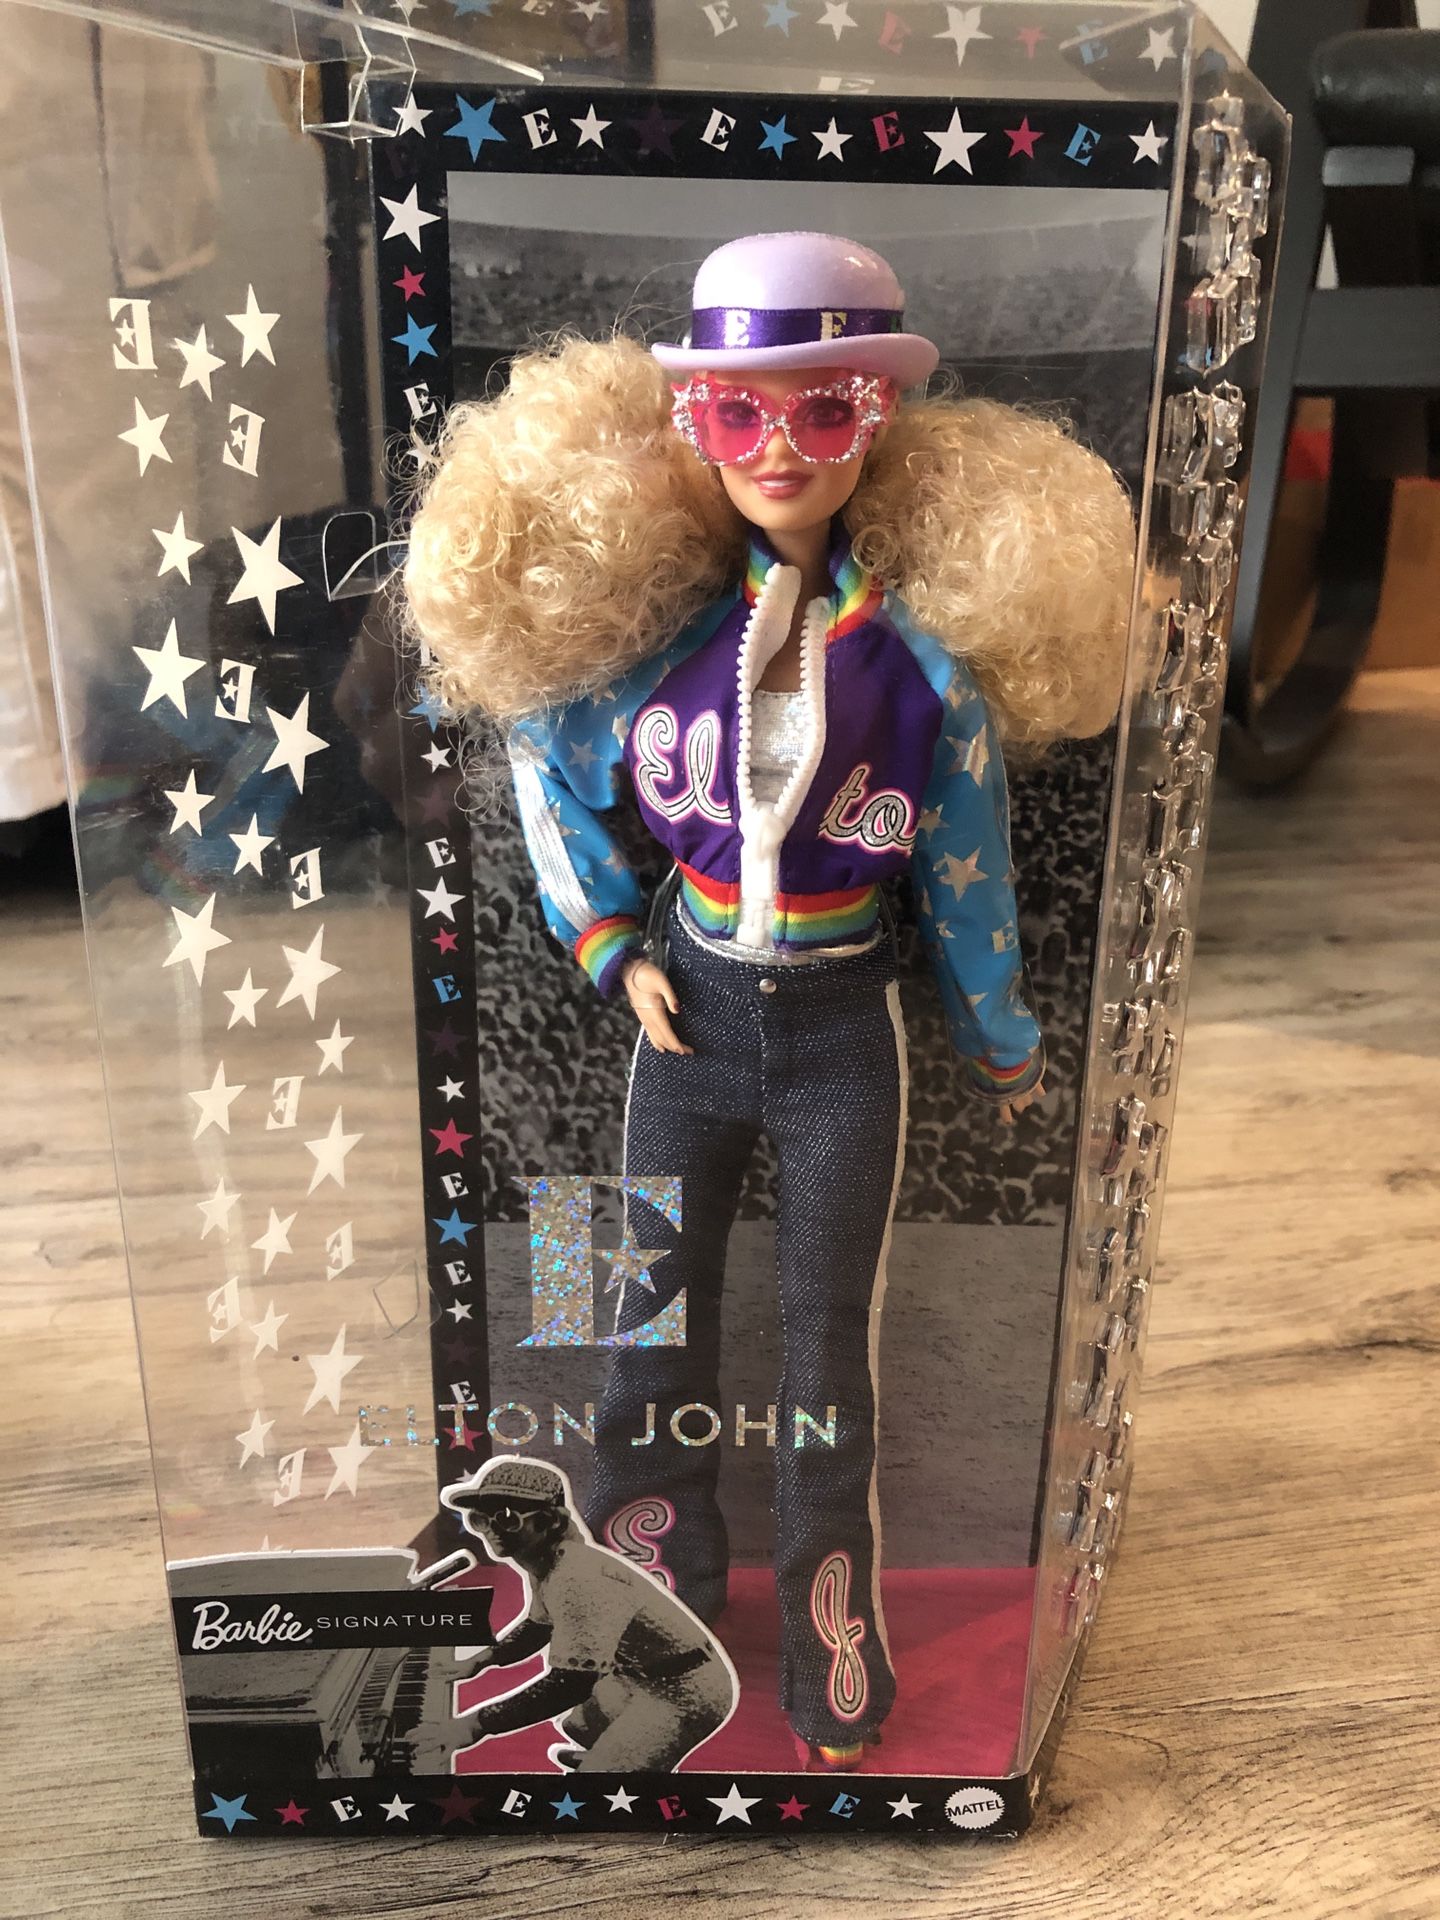 Barbie Signature Elton John Collector Doll - SOLD OUT LIMITED EDITION